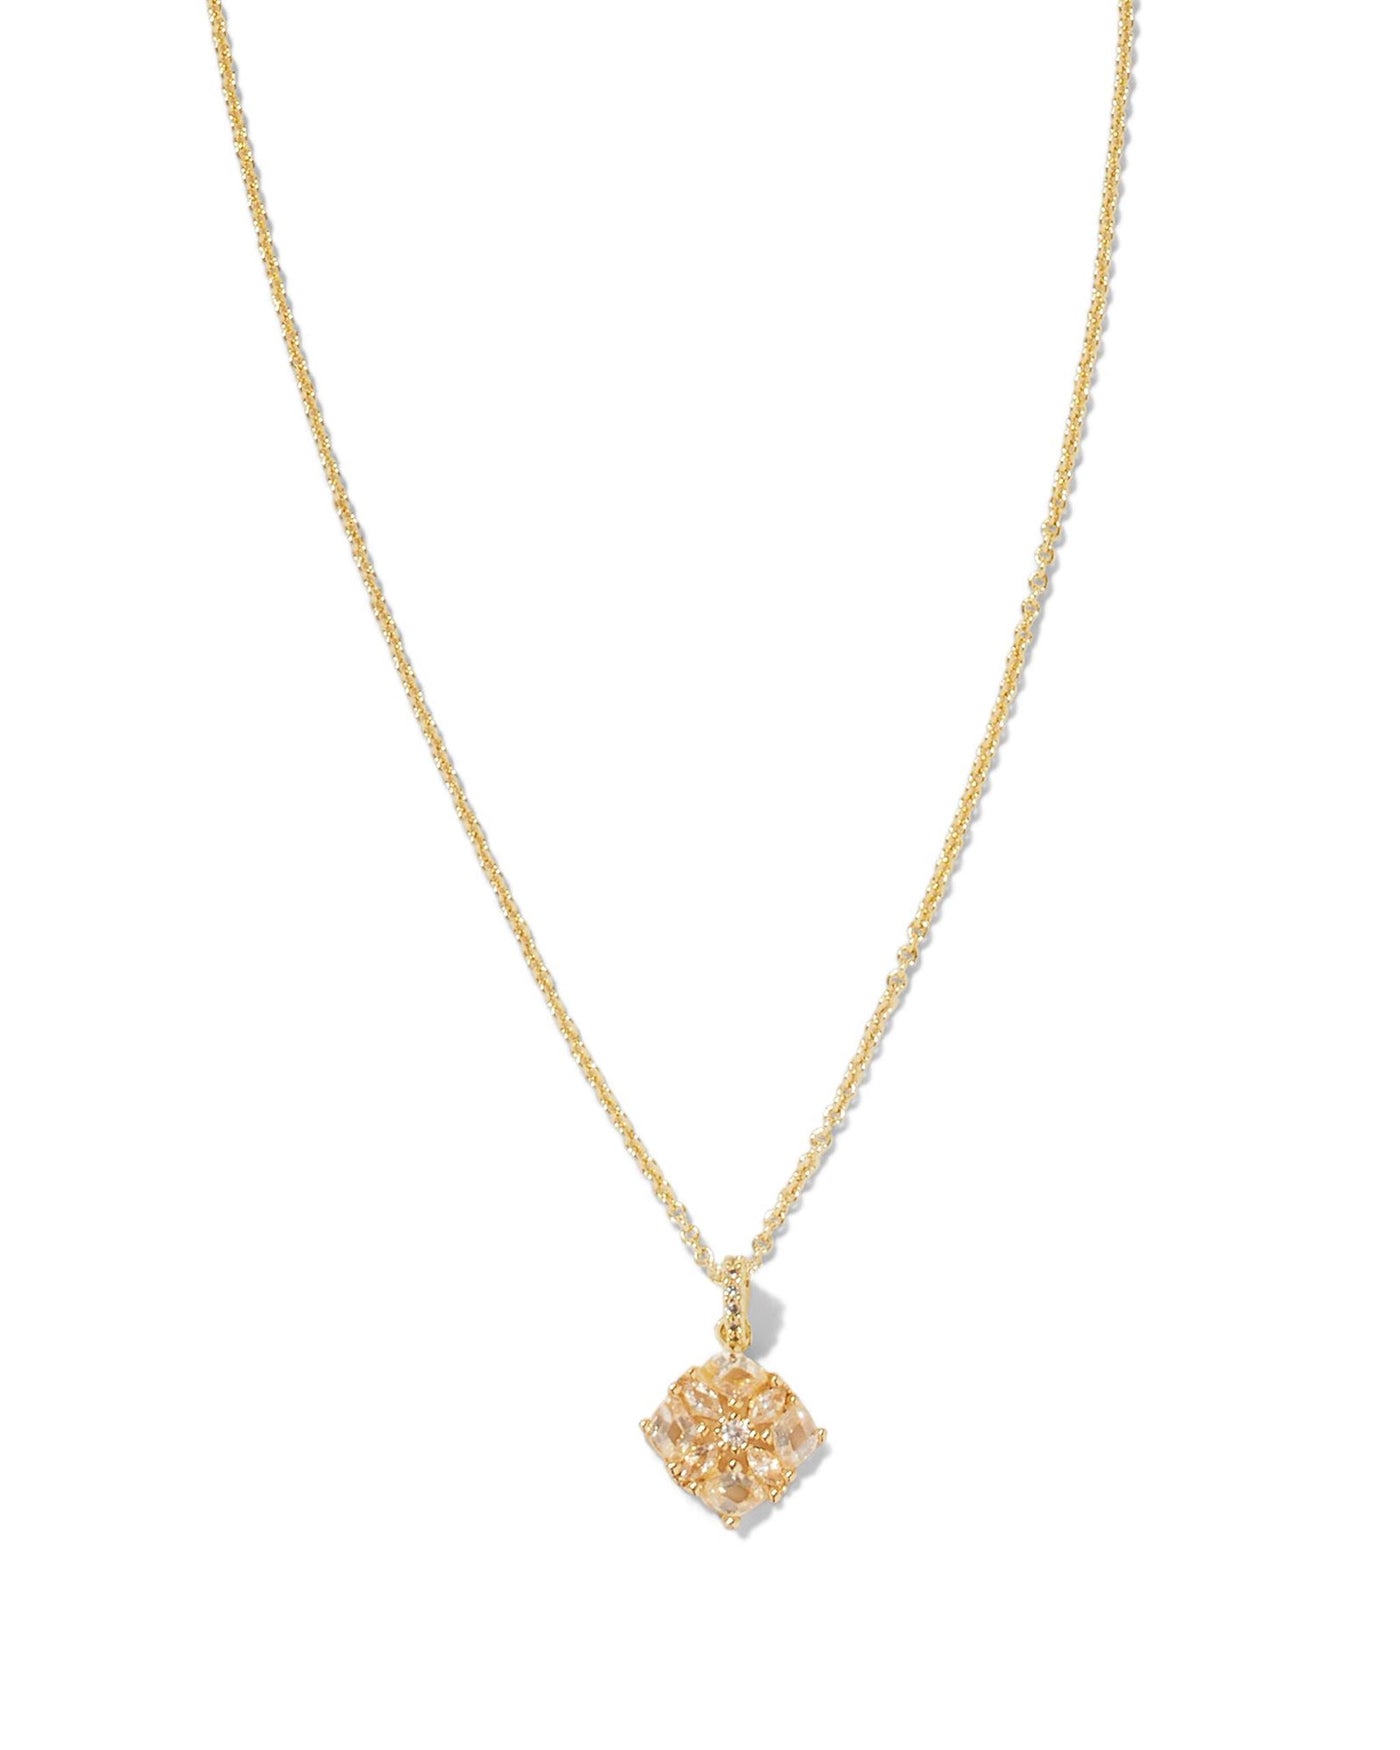 Gold Tone Necklace Featuring White Crystal by Kendra Scott